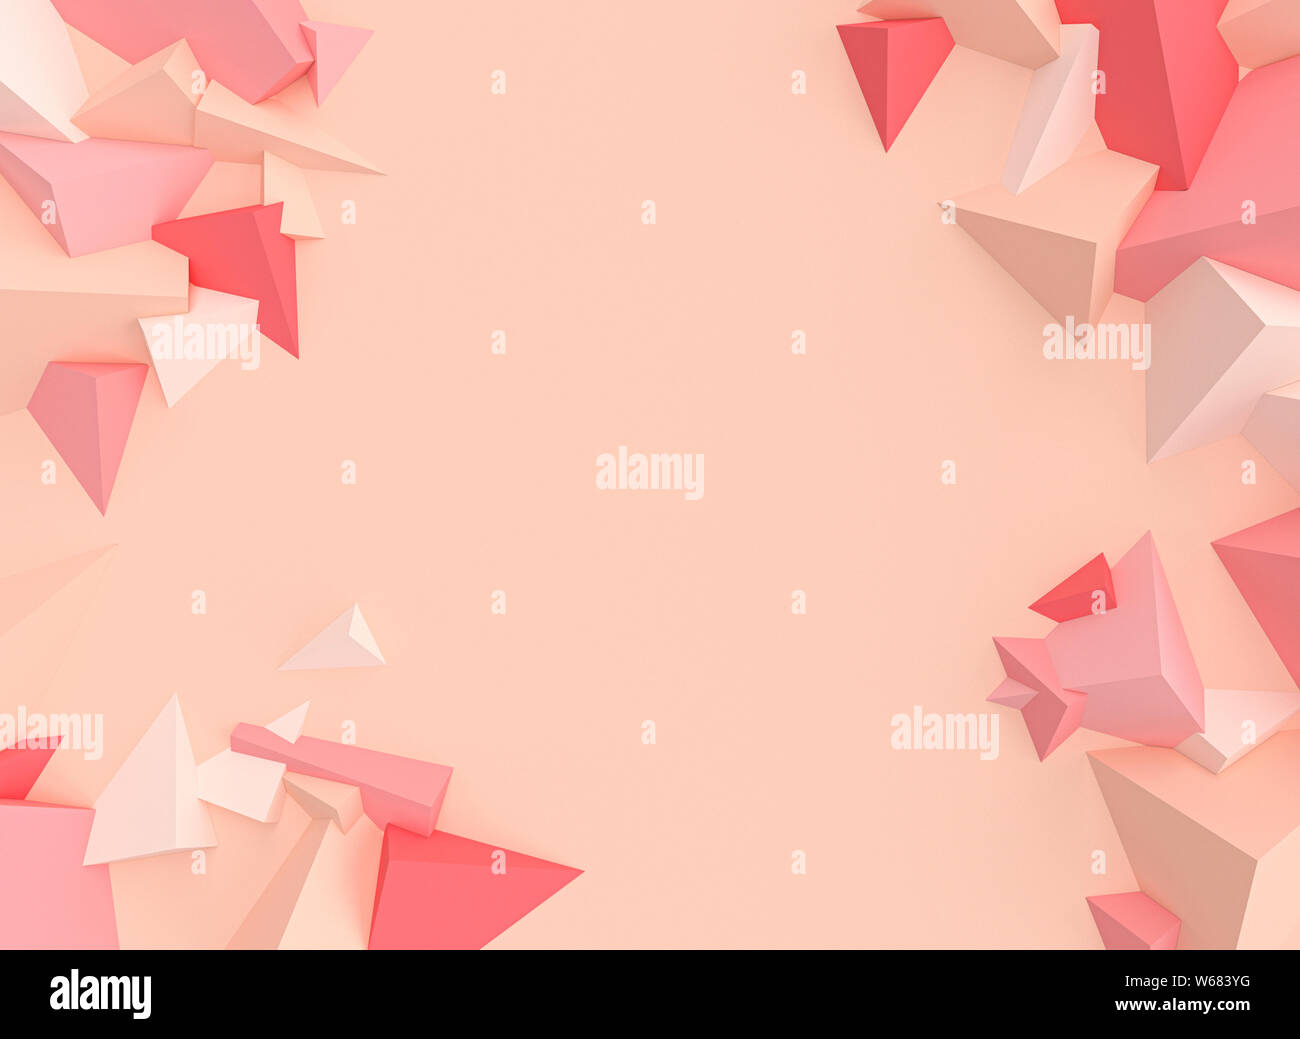 3d render image of a polygonal geometric background of randomly placed elements with different pink tones Stock Photo